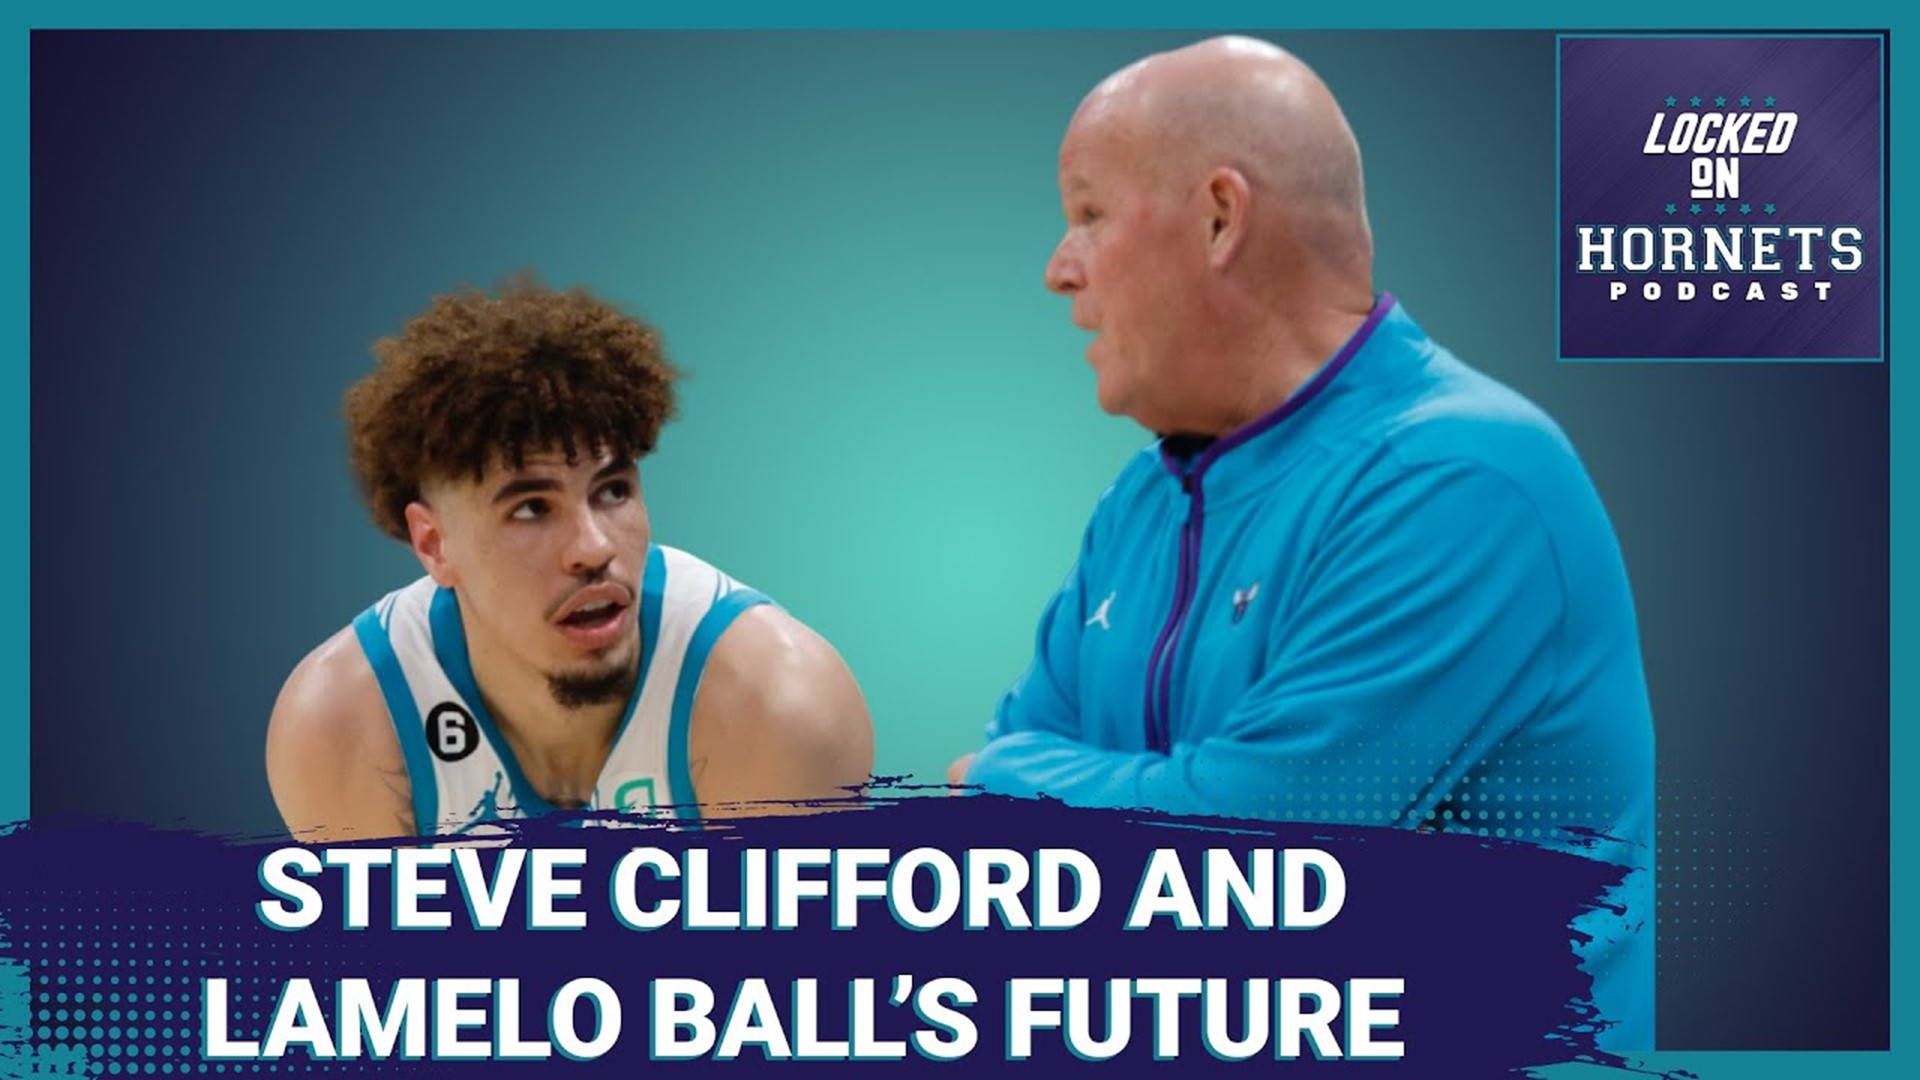 How do you evaluate Steve Clifford’s coaching in the first half of the season as they gear up for the last 40 games?